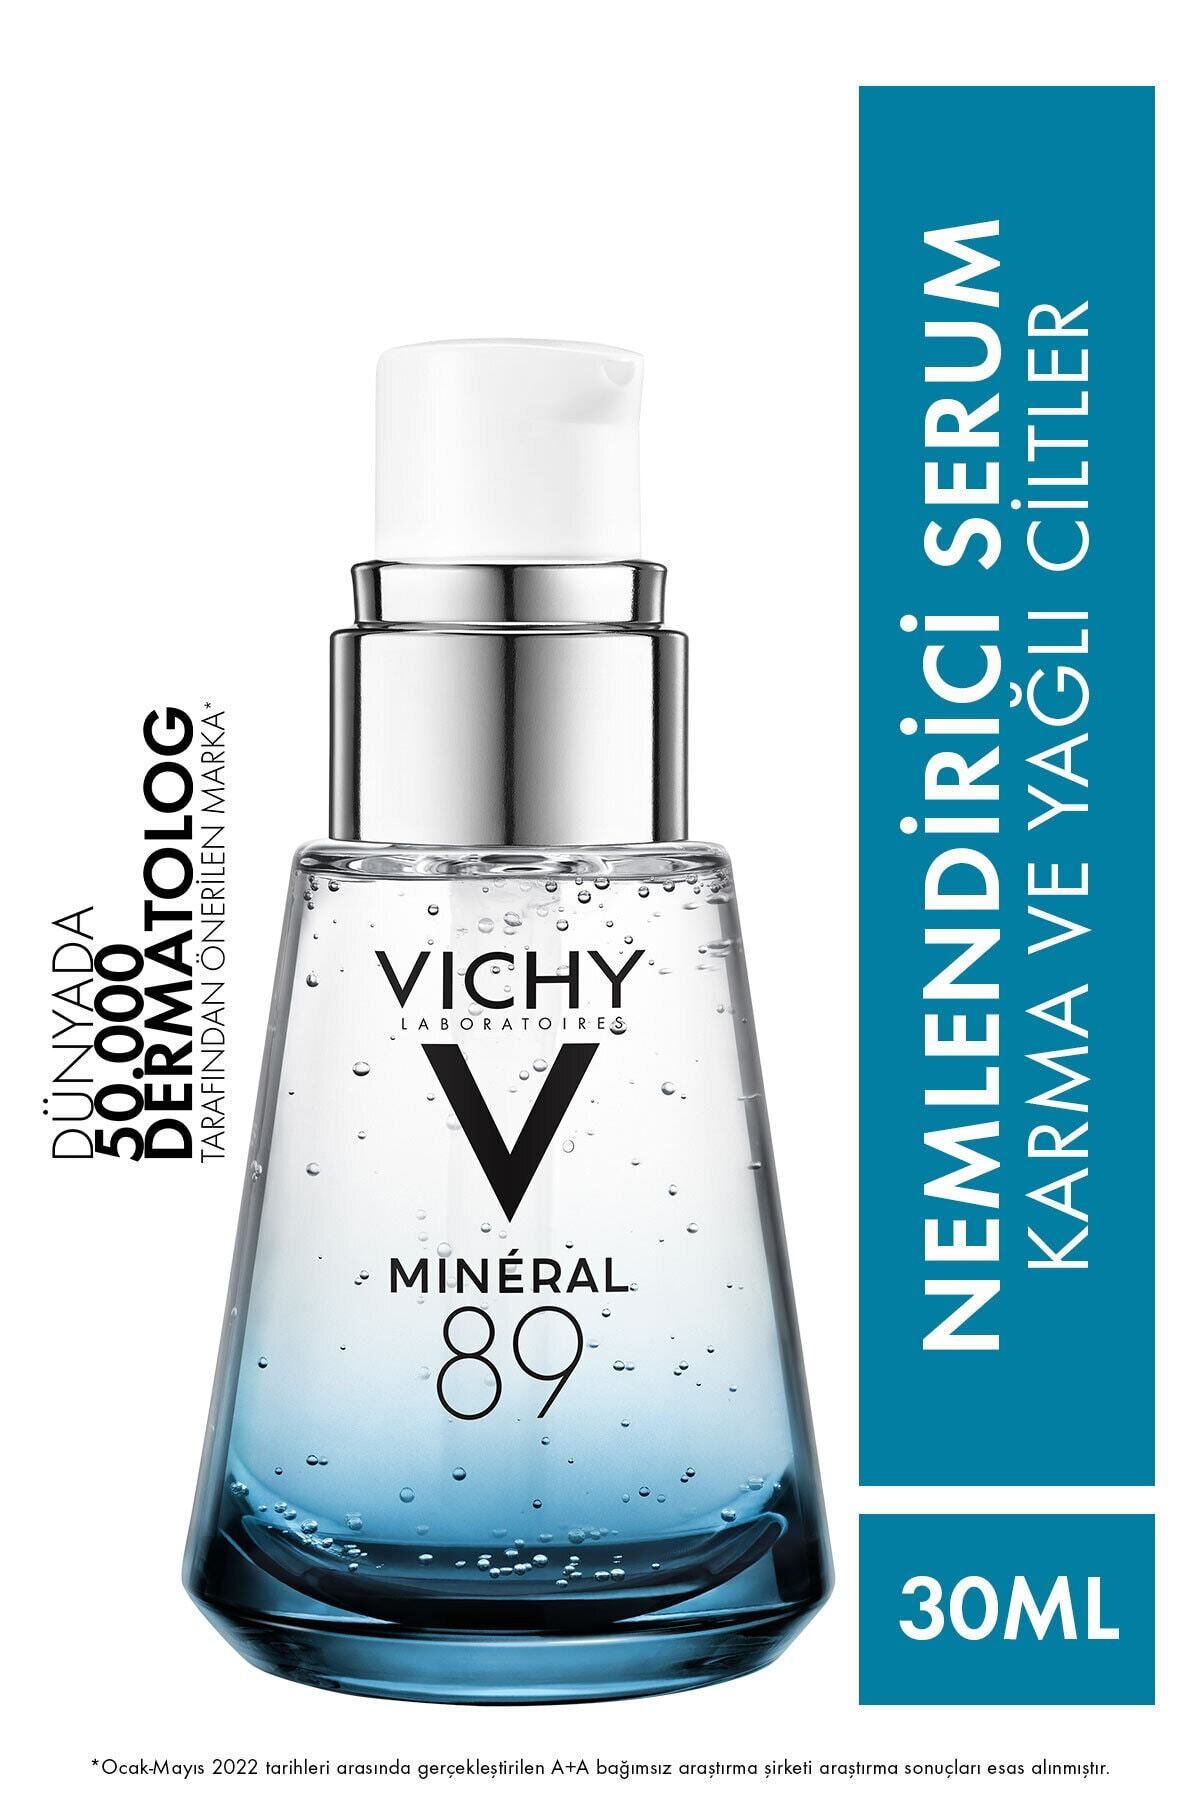 Vichy Moisturizing and Repairing Serum Containing Mineral 89 Hyaluronic Acid 30Ml PSSNS377